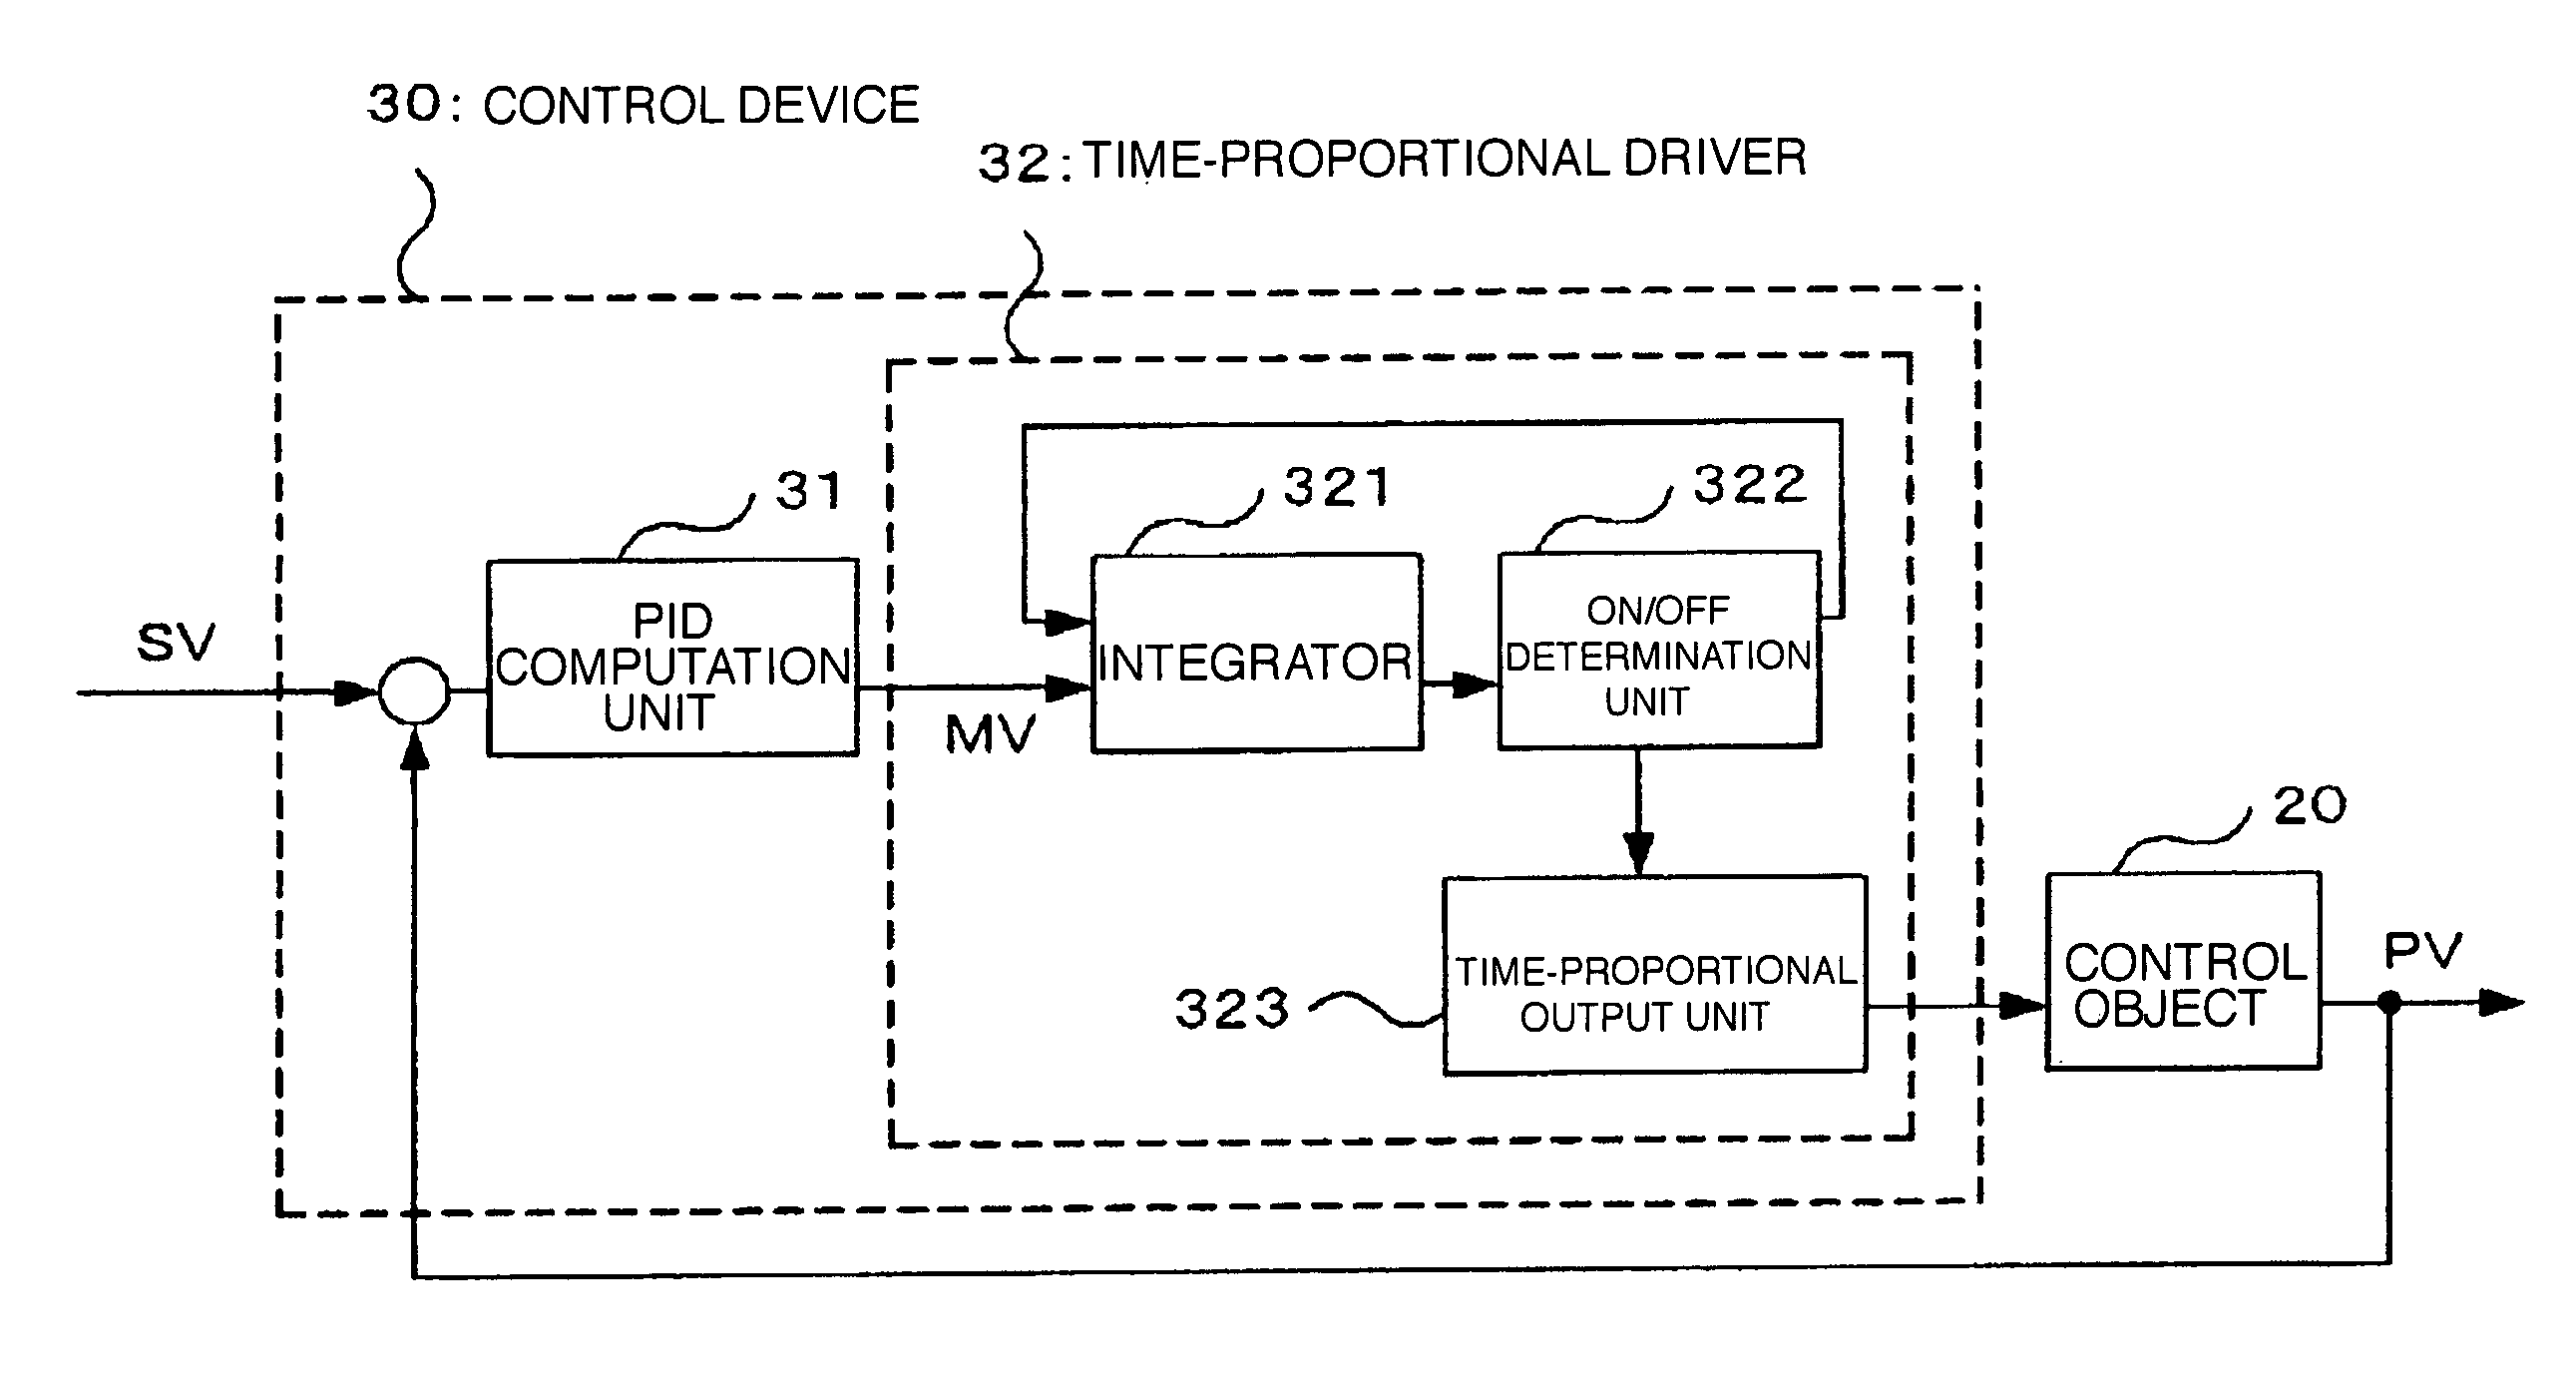 Control device for controlling a control object at a ratio of on-time to off-time for a time-proportional output